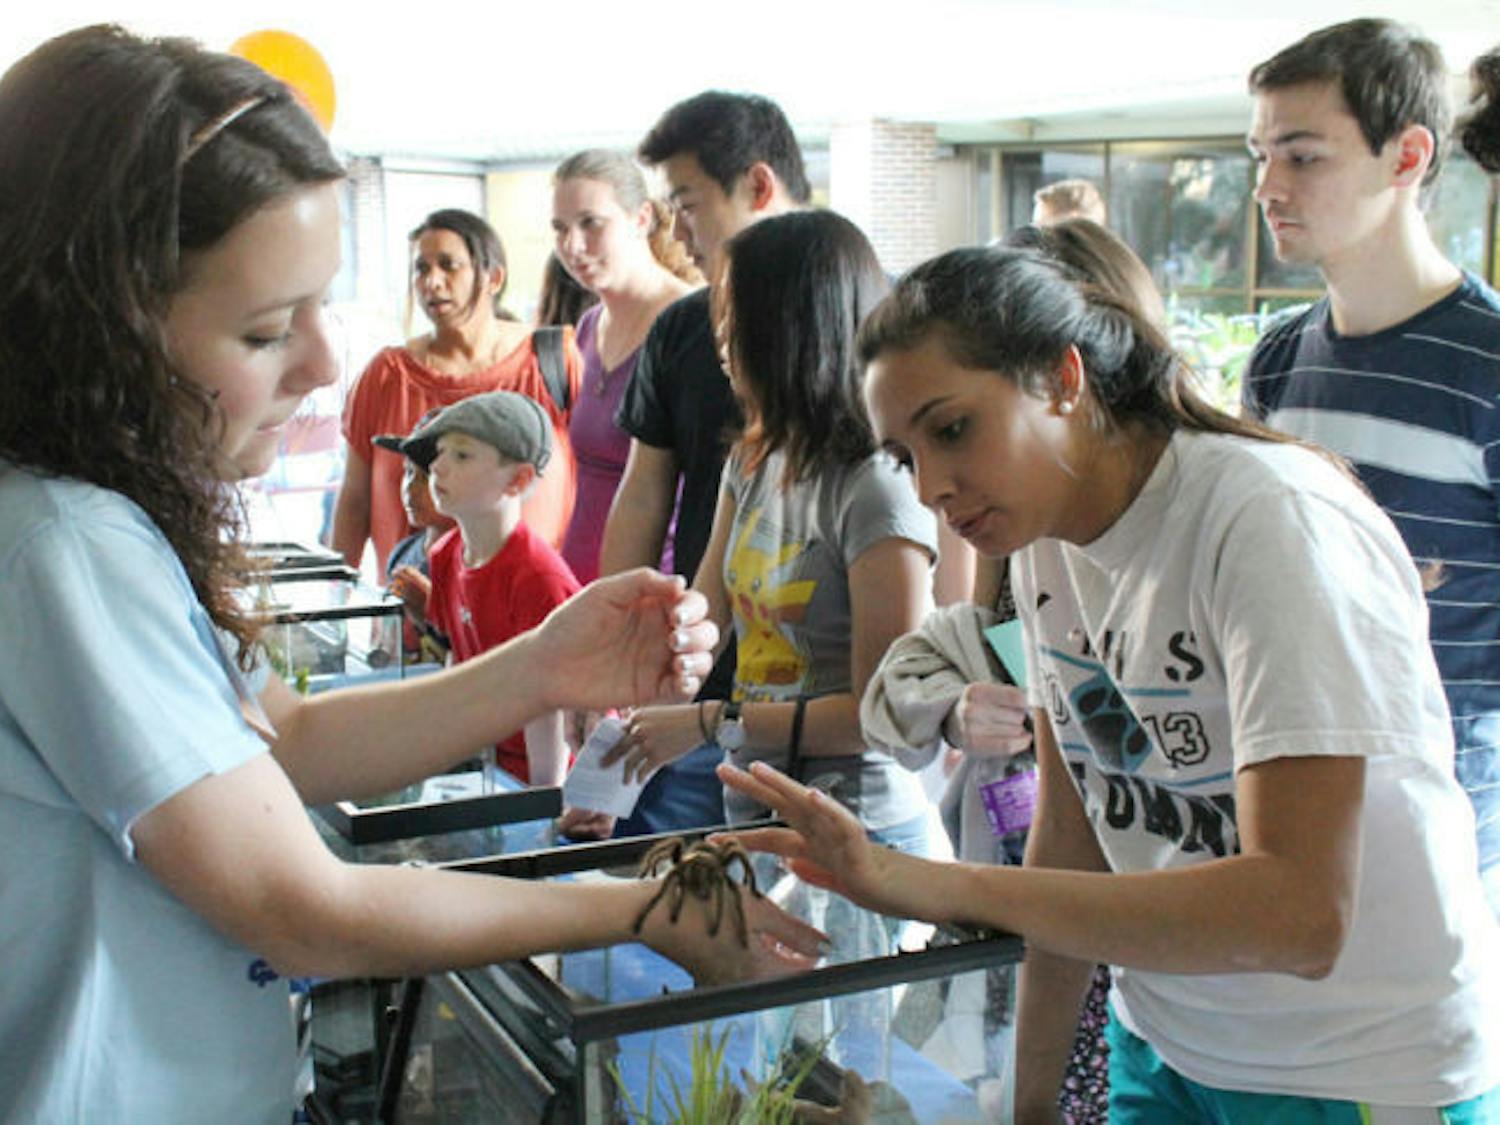 Morgan Kerr, a UF biological sciences senior, pets Rosie the tarantula at BugFest in Steinmetz Hall on Tuesday. The event included cockroach races and foods made with insect ingredients.